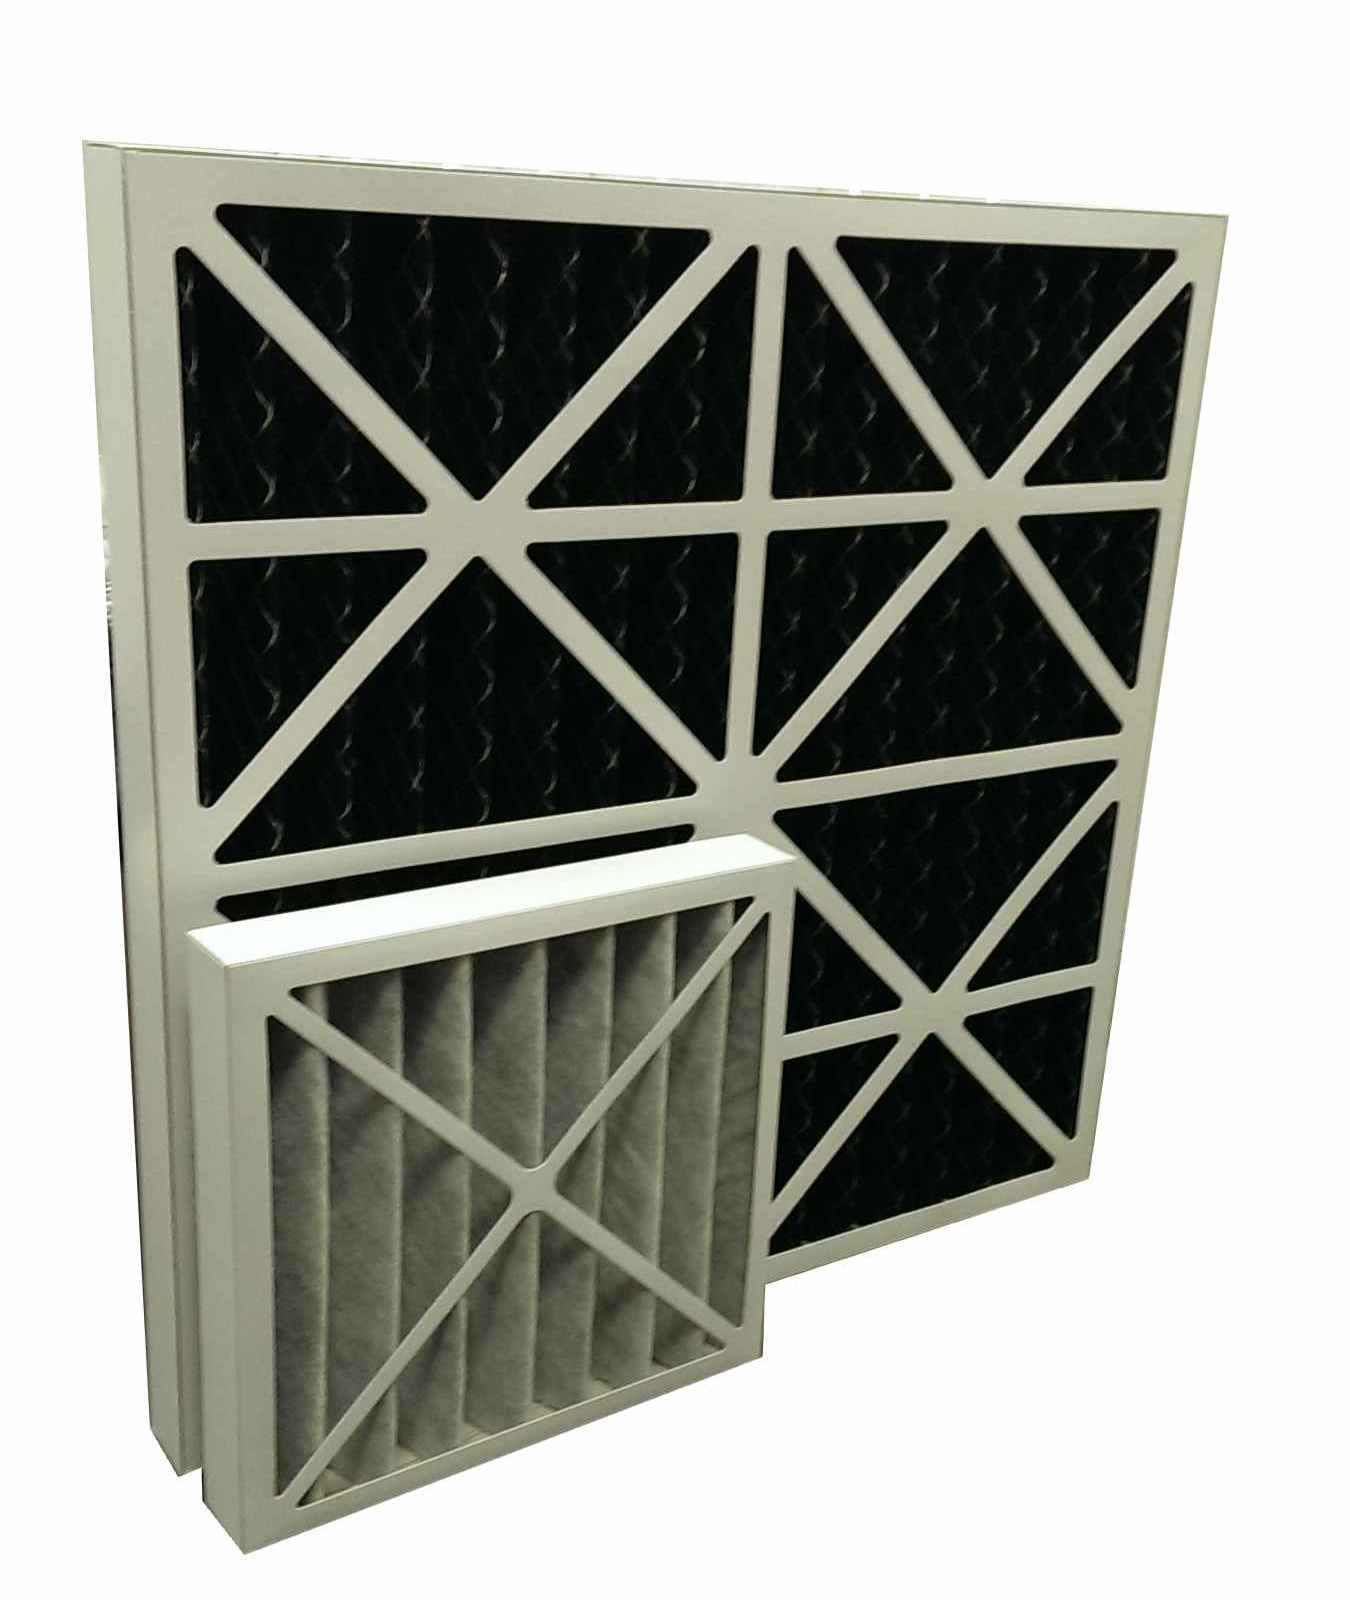 Composite Air Filter for Gas & Particle Filtration - MERV 13 - 24"x24"x2"/12"x12"x2"